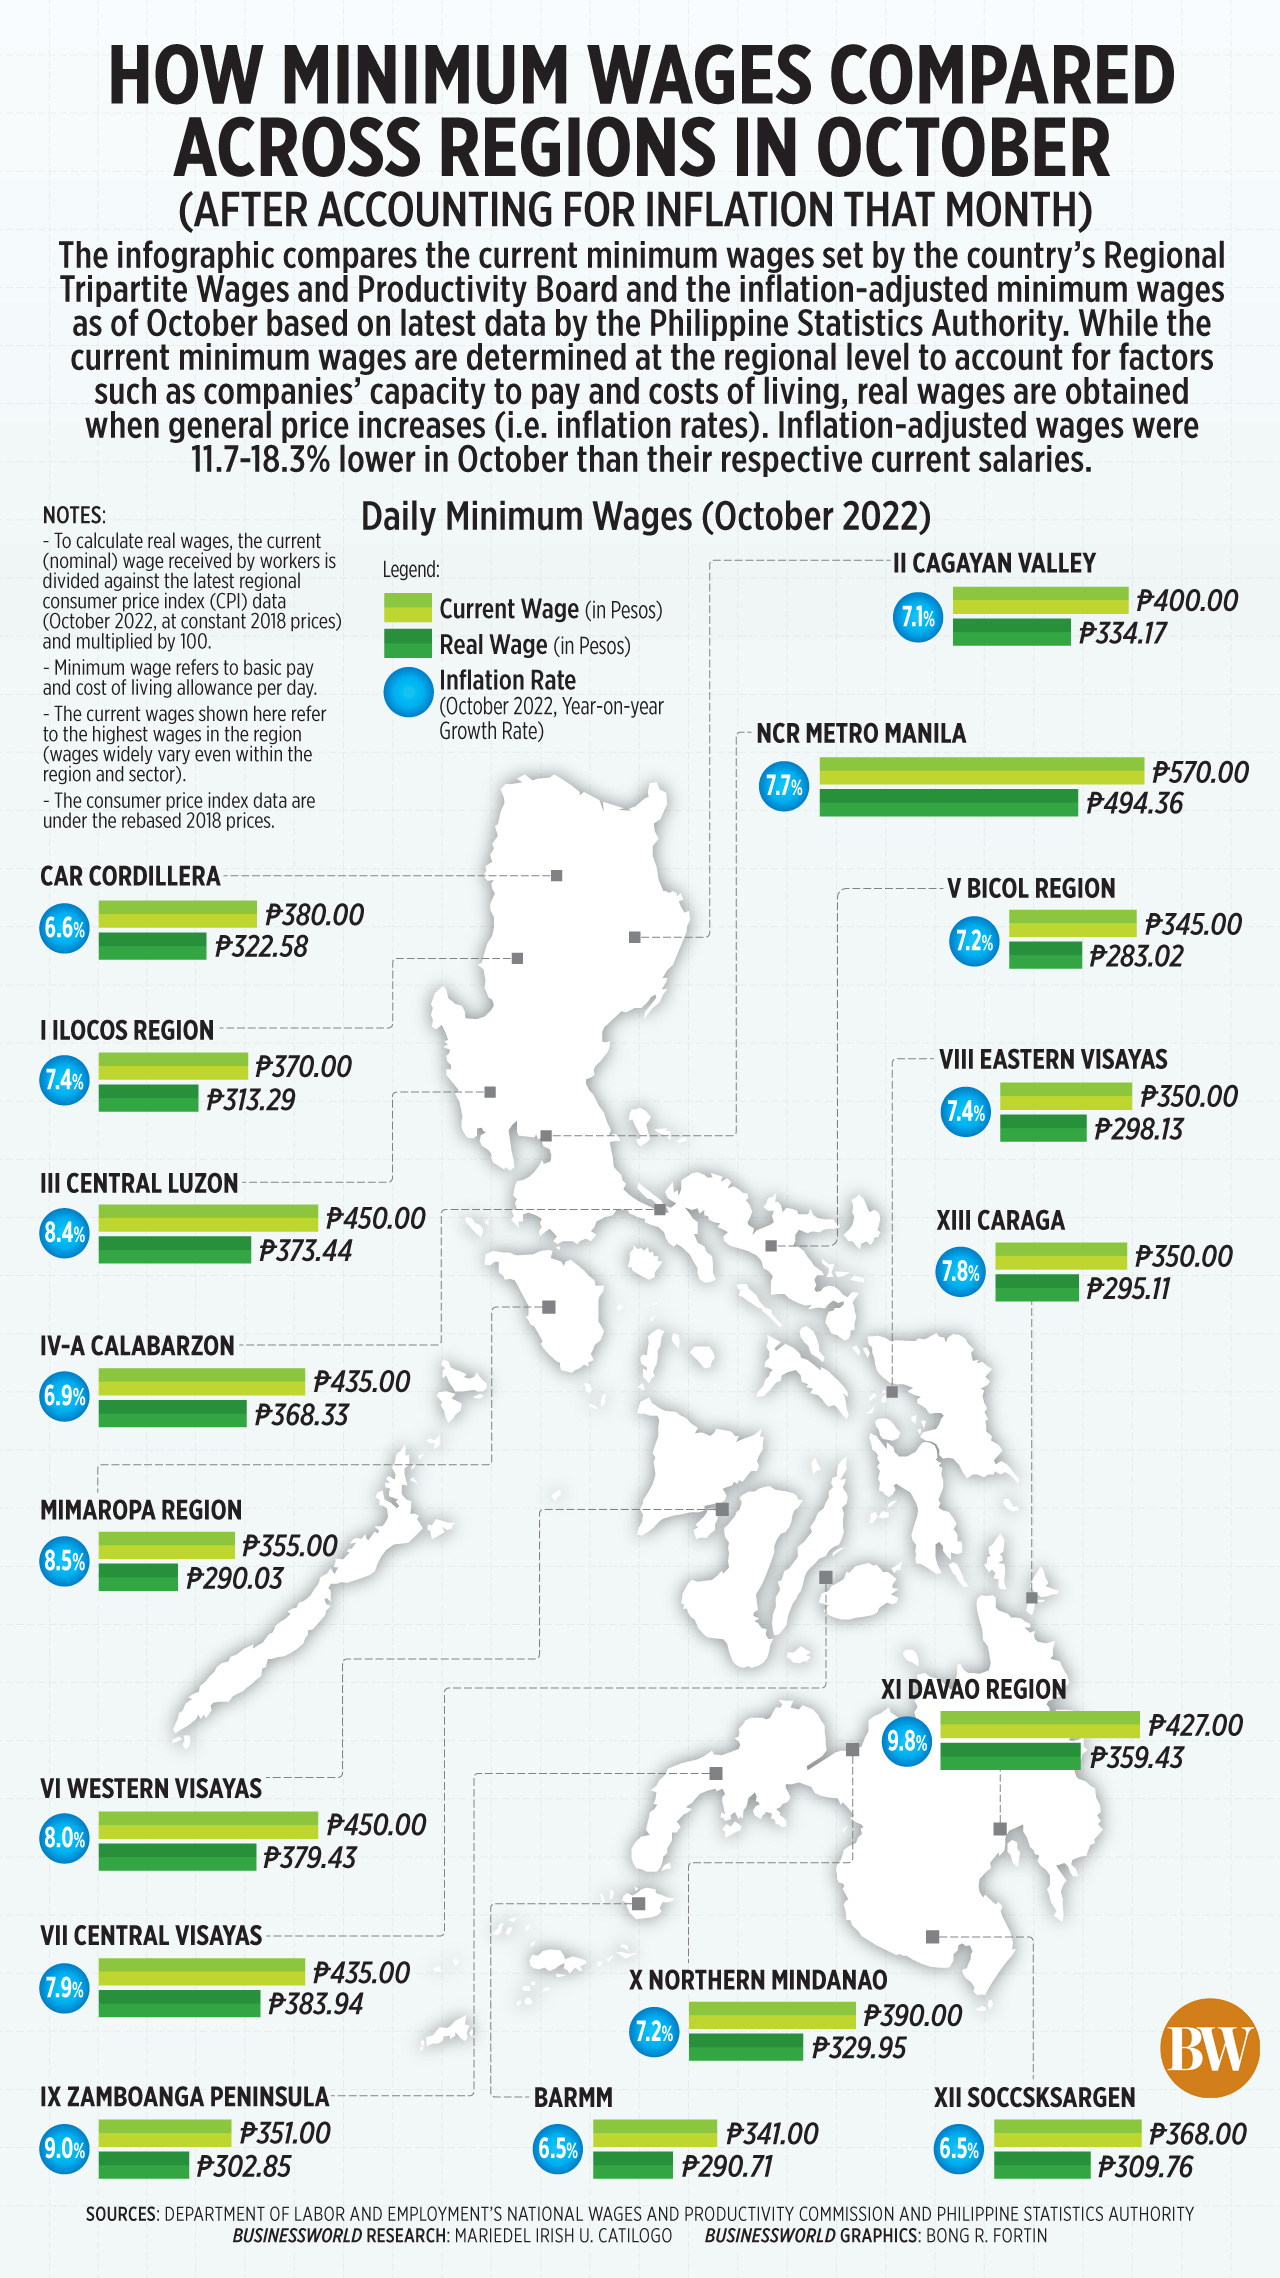 How minimum wages compared across regions in October